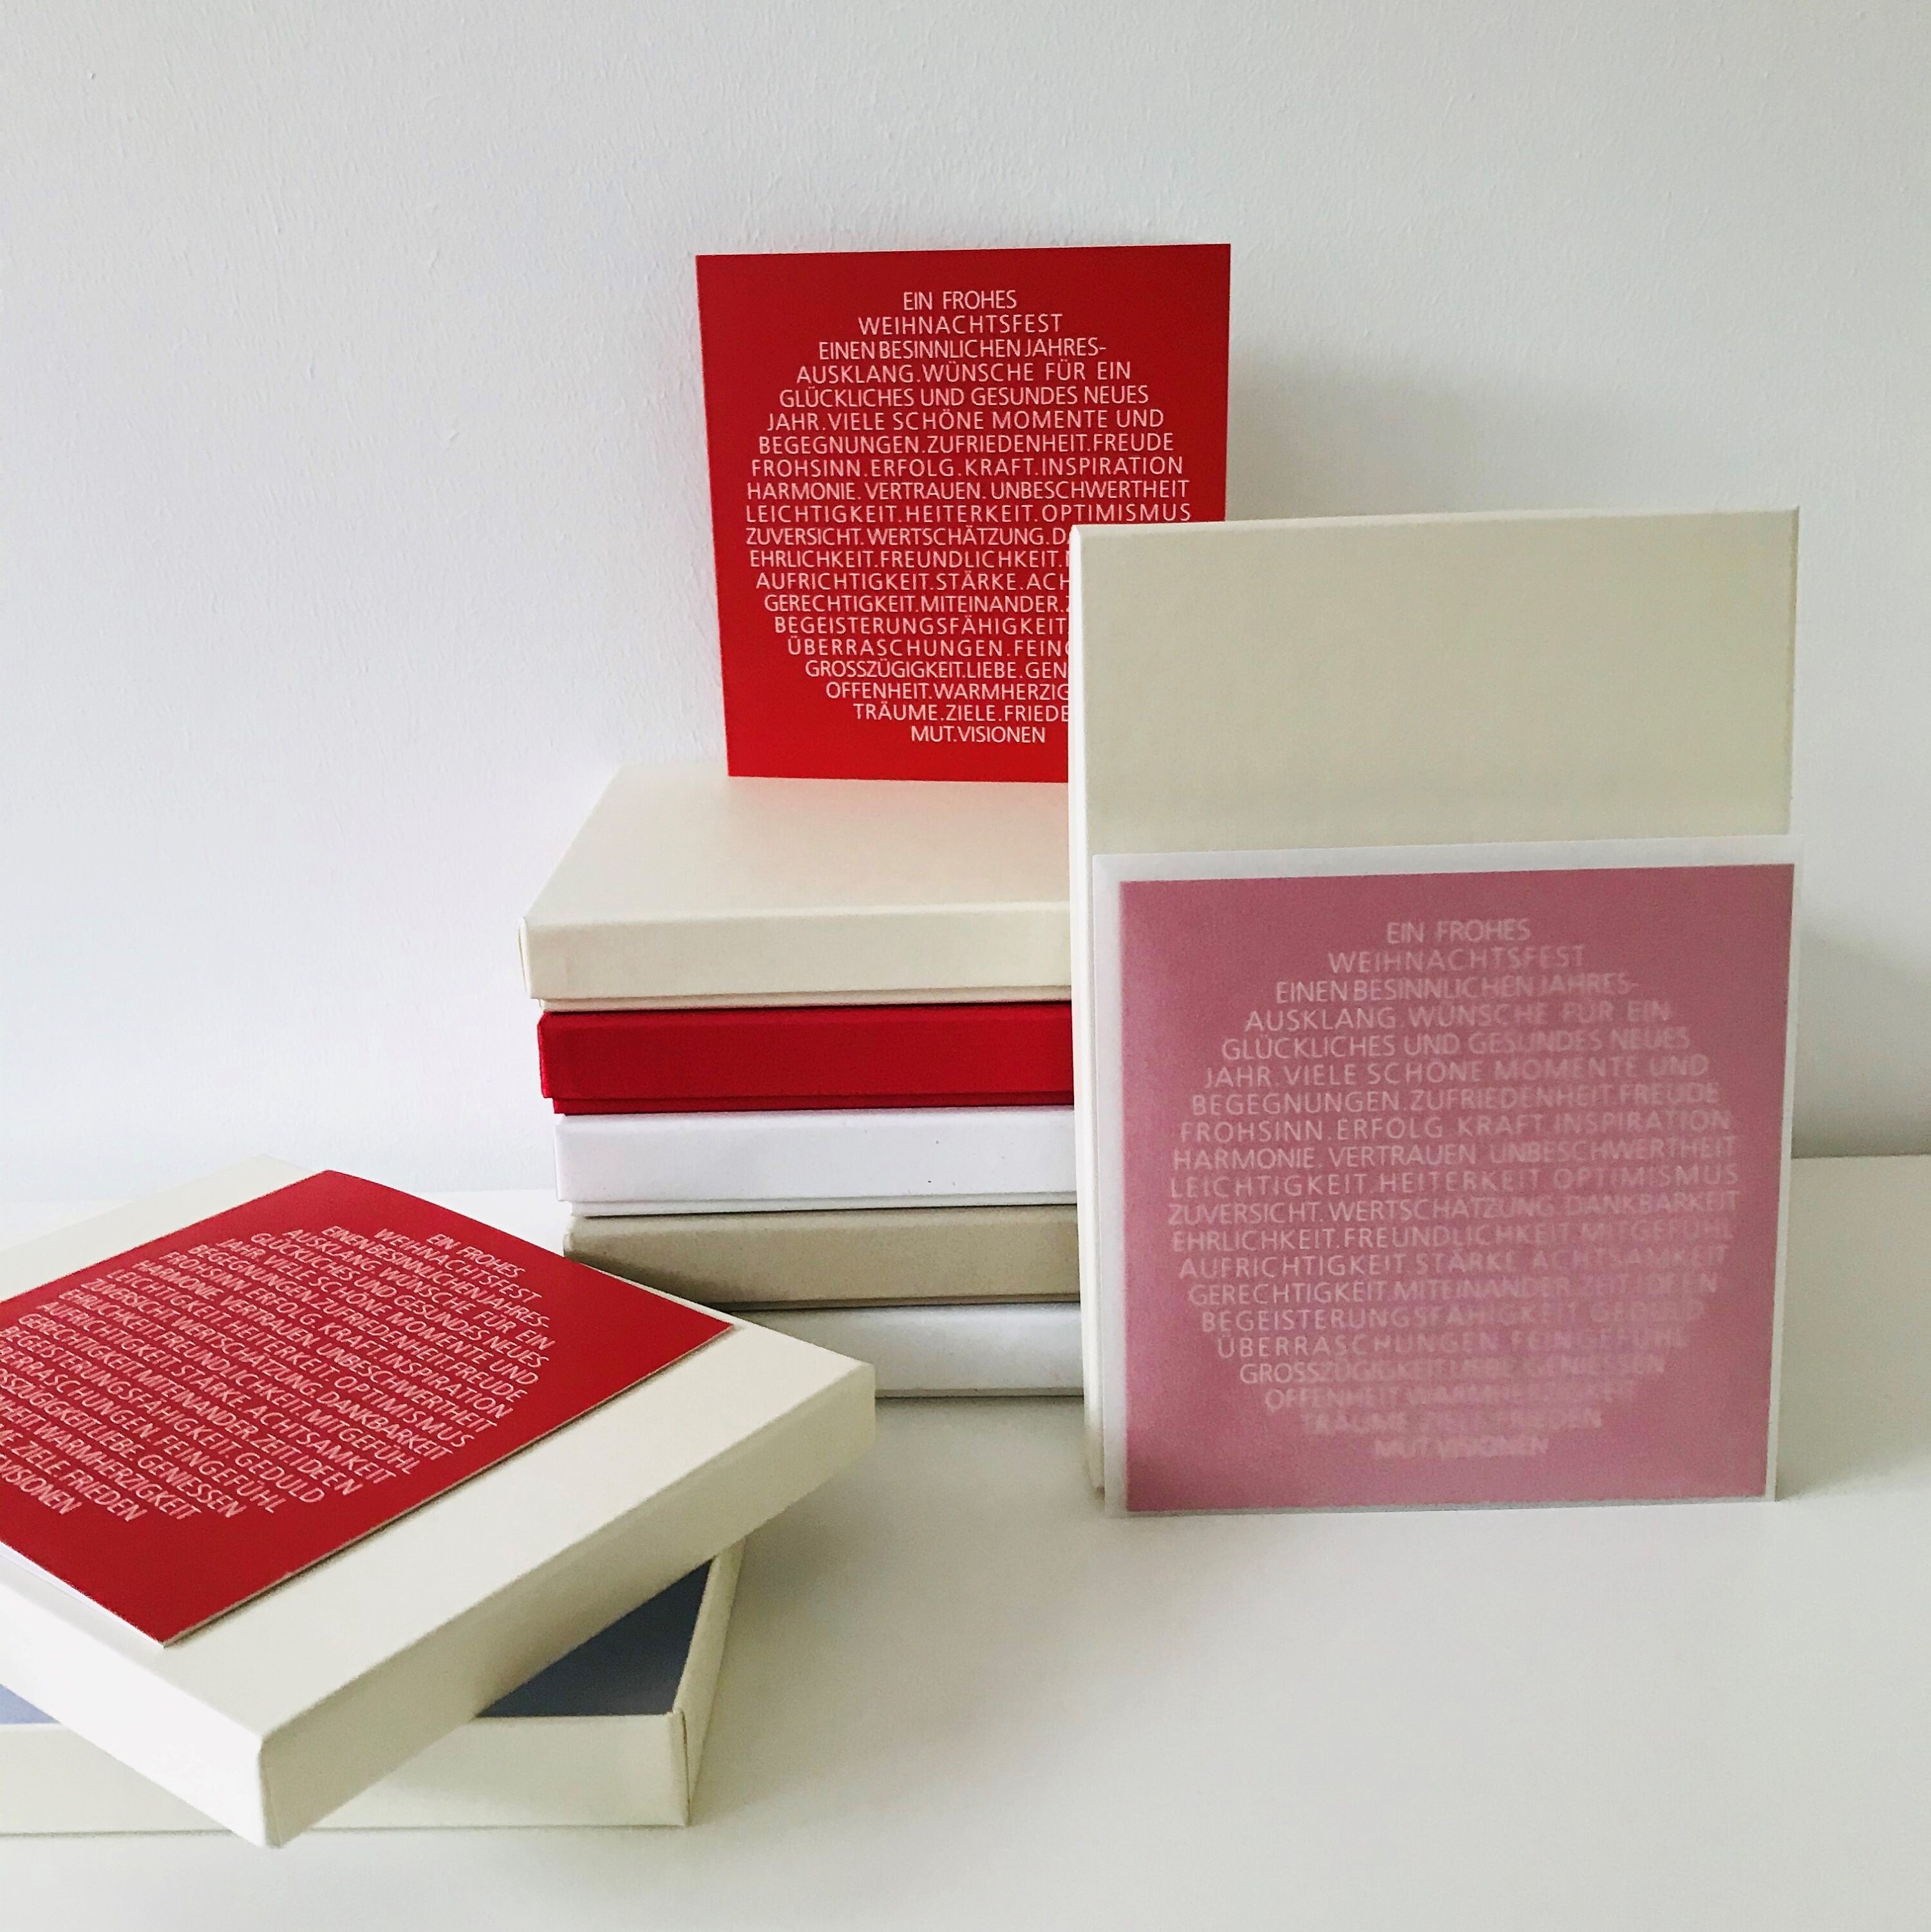 Individually Embossed Photo Boxes, Gift Boxes, Boxes, 23 X 16.5 X 2.5 Cm  DIN C5, Kraft Paper With White Core 